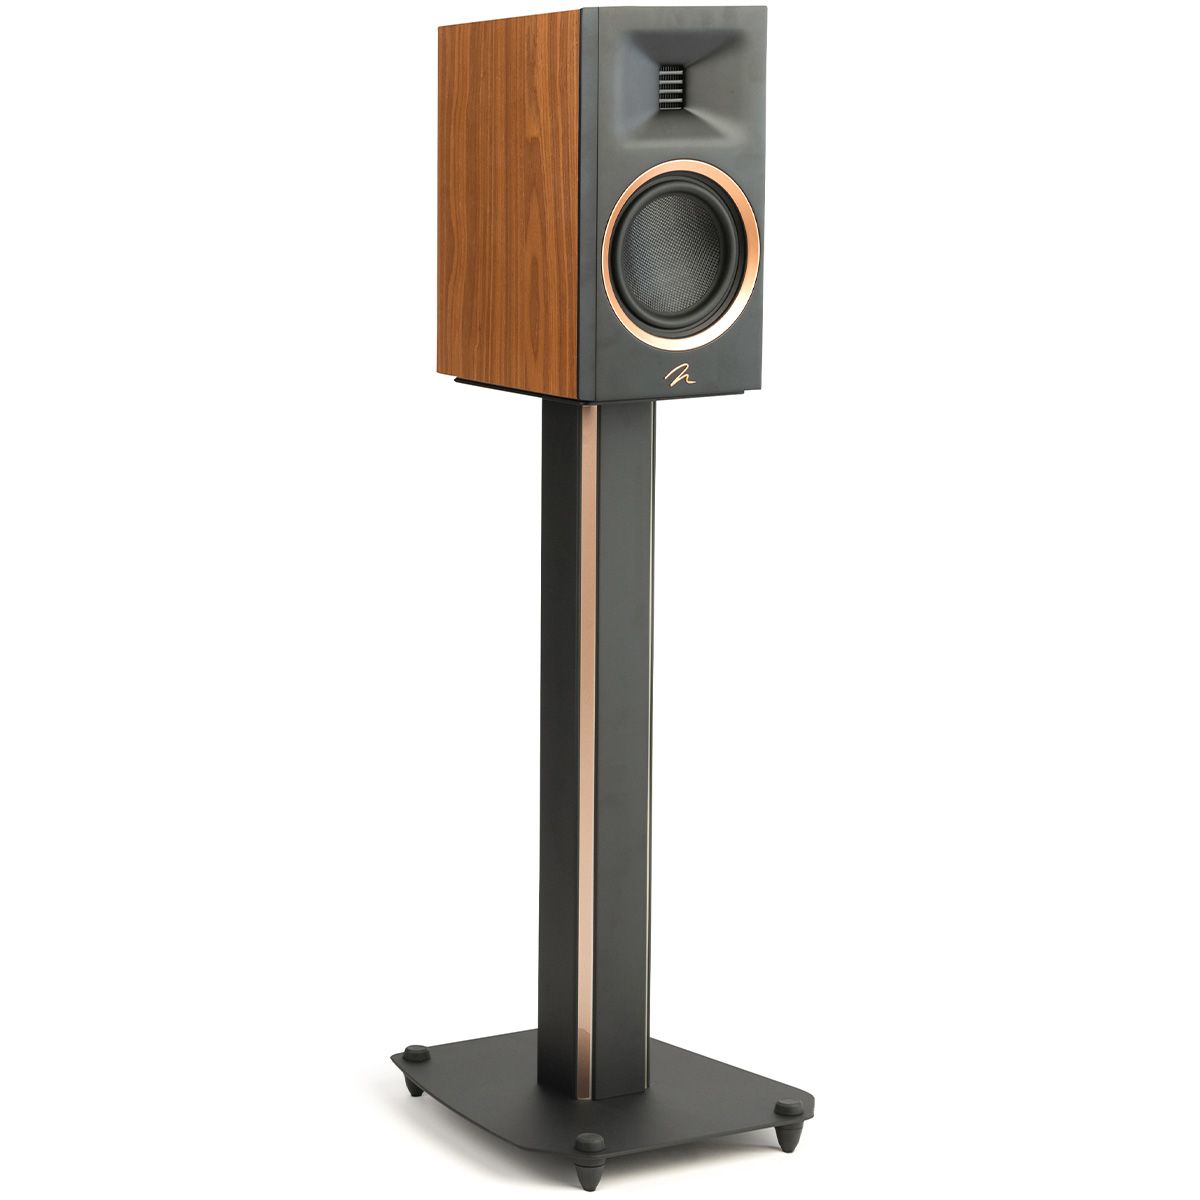 MartinLogan Motion XT B10  Bookshelf Speaker in walnut angled on stands view without grilles on white background